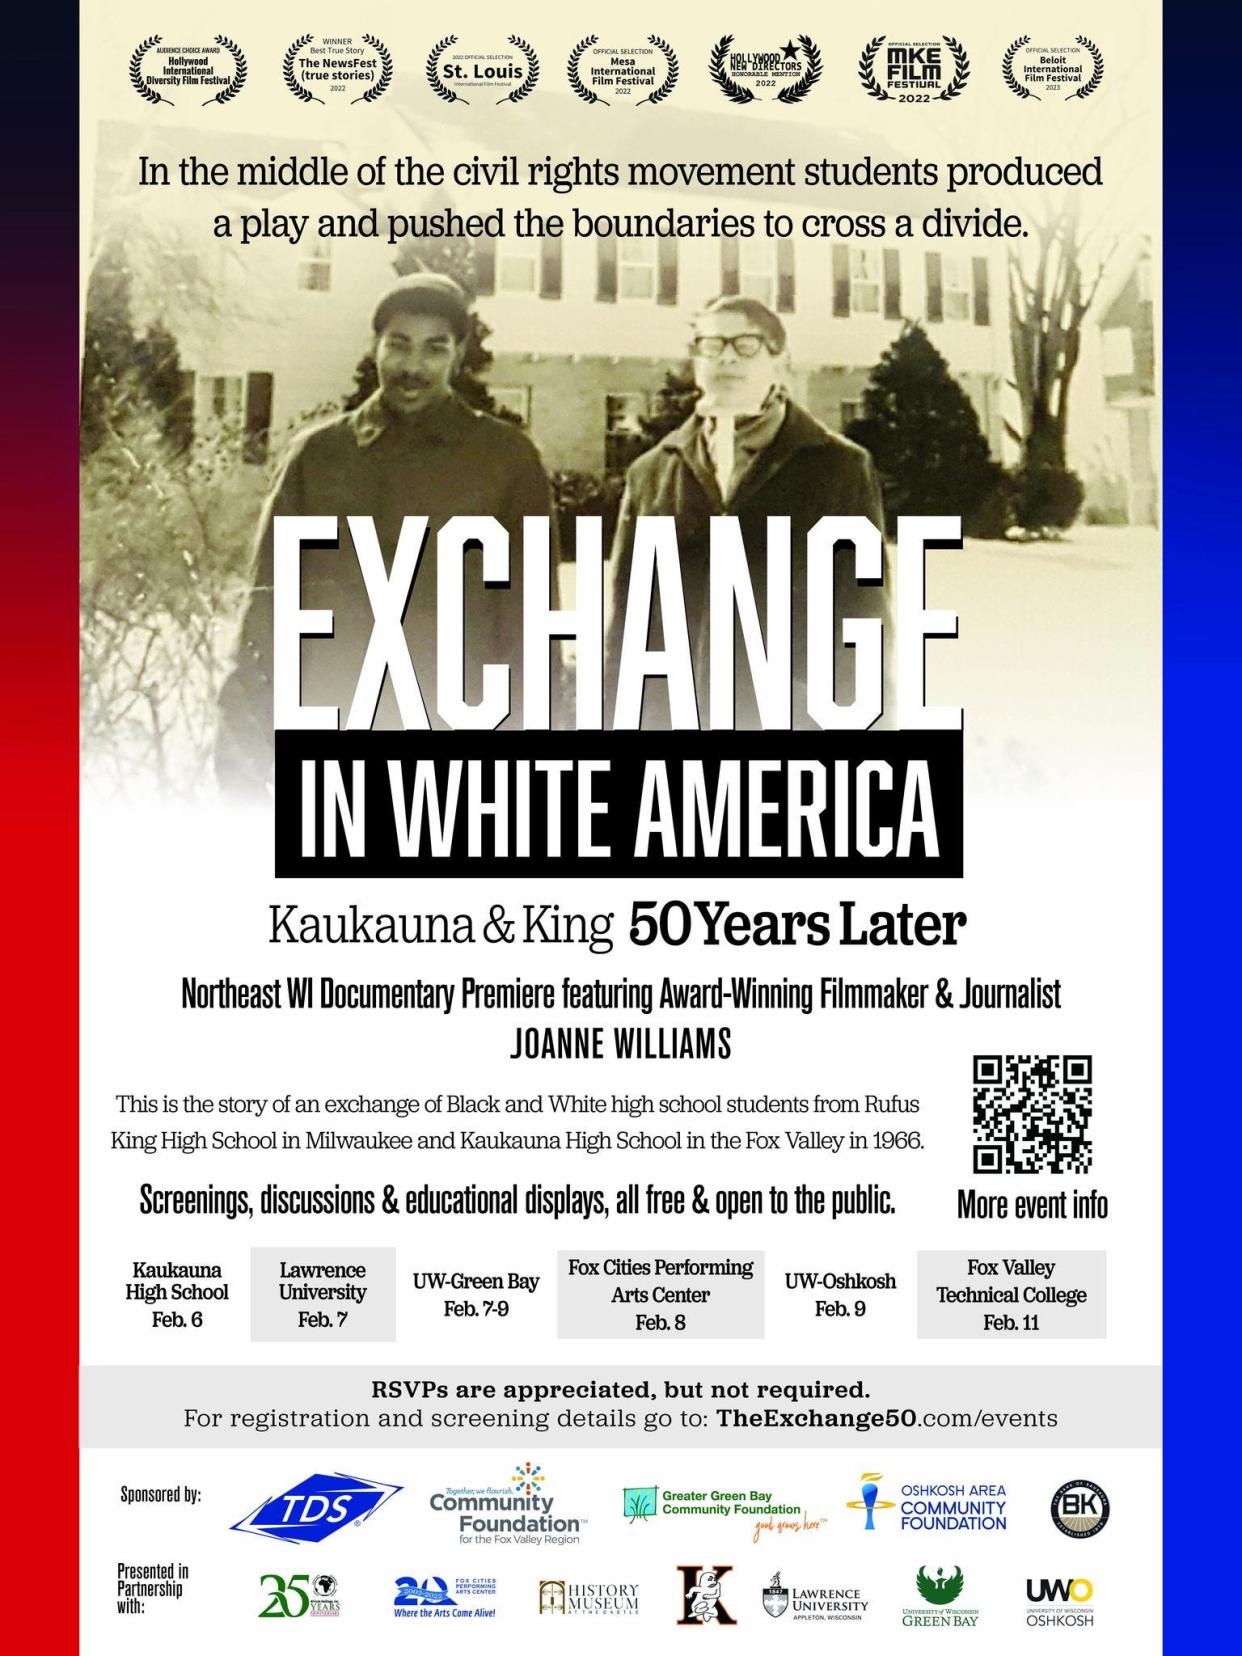 A poster for the documentary "The Exchange: In White America." The documentary depicts a 1966 exchange between Black and white students in Kaukauna and Milwaukee. Eight free showings of the film will take place during Feb. 2023 in northeastern Wisconsin.